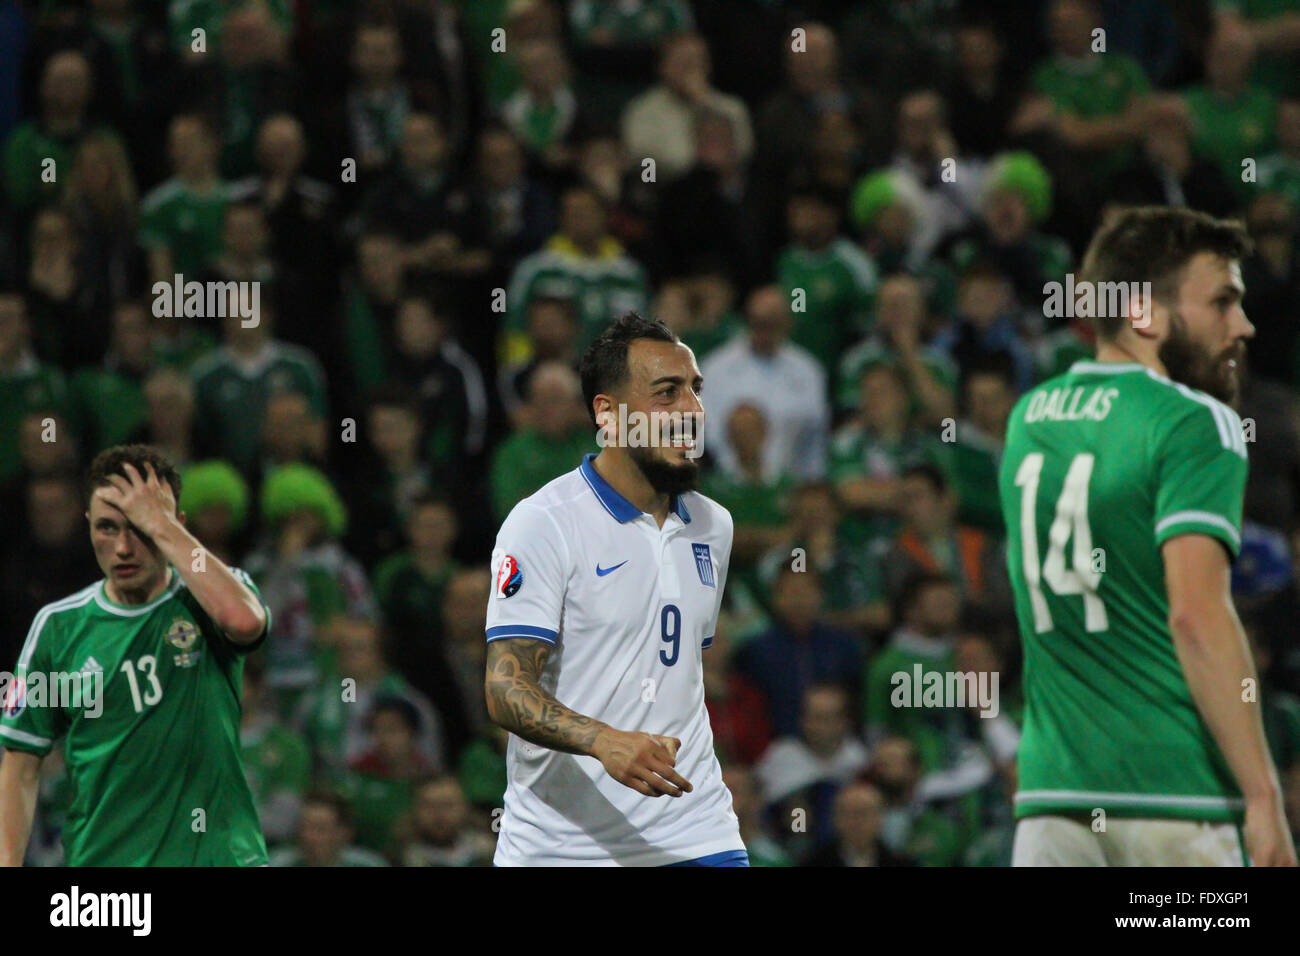 08 Oct 2015 - Euro 2016 Qualifier - Group F - Northern Ireland 3 Greece 1. A wry smile from Greece's Kostas Mitroglou after an early attack is thwarted. Stock Photo